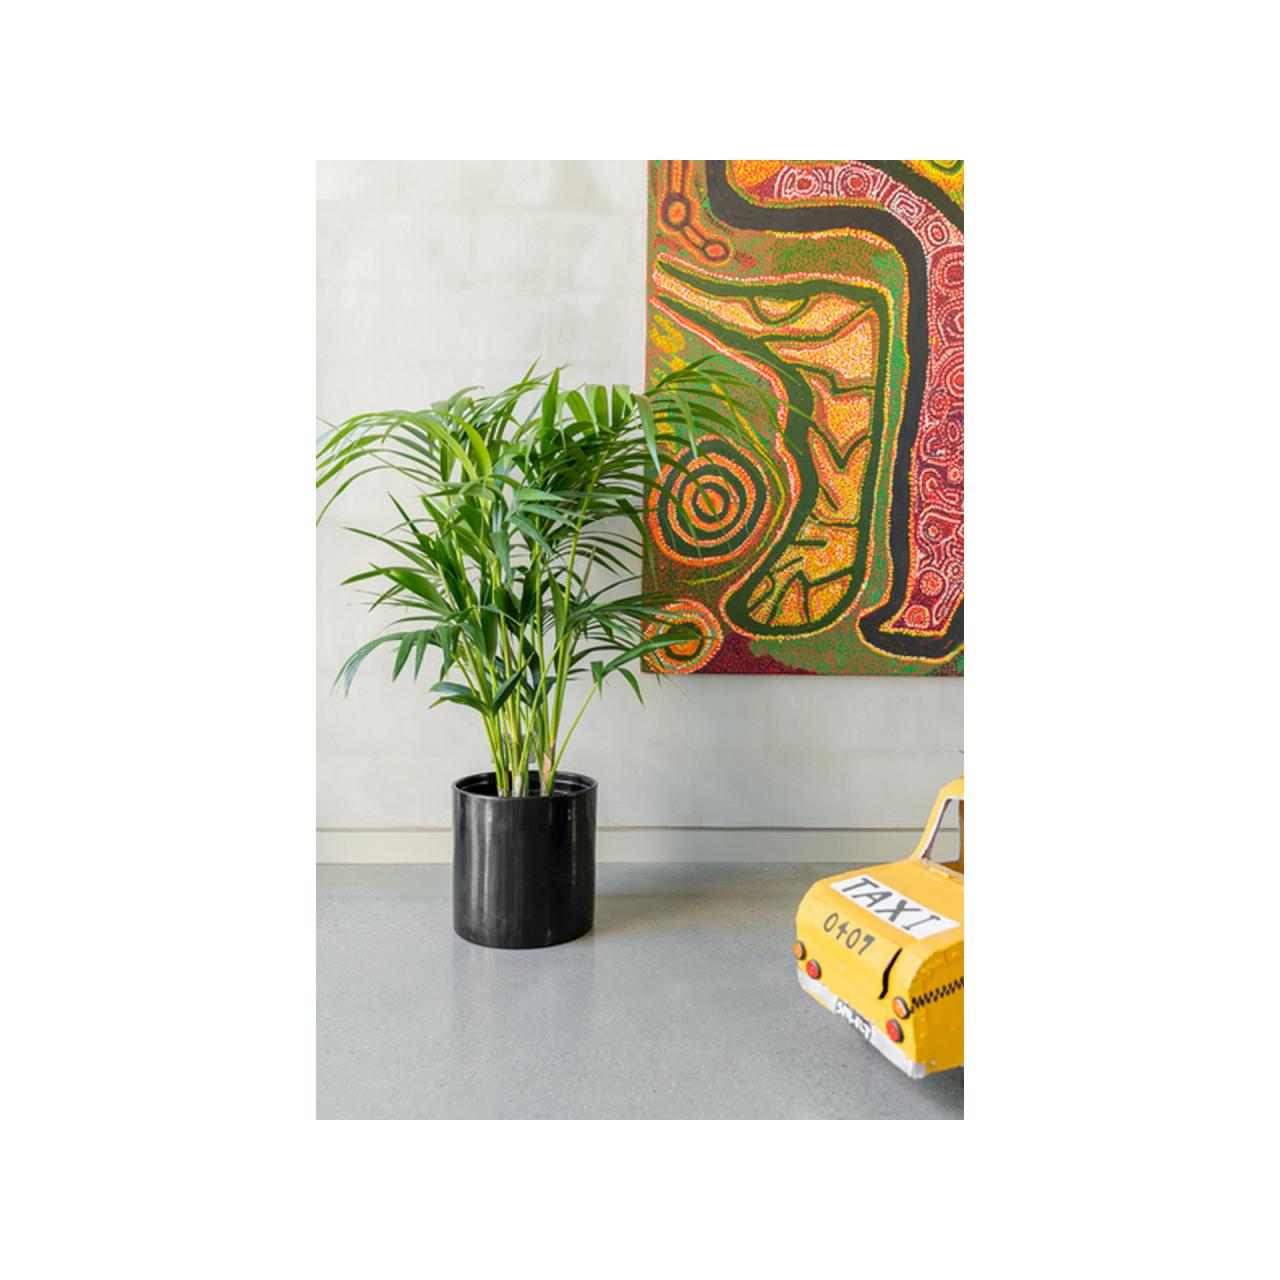 Hanging Plants Indoor | 25cm Pot Bunnings: Essential Guide to Choosing and Caring for Plants